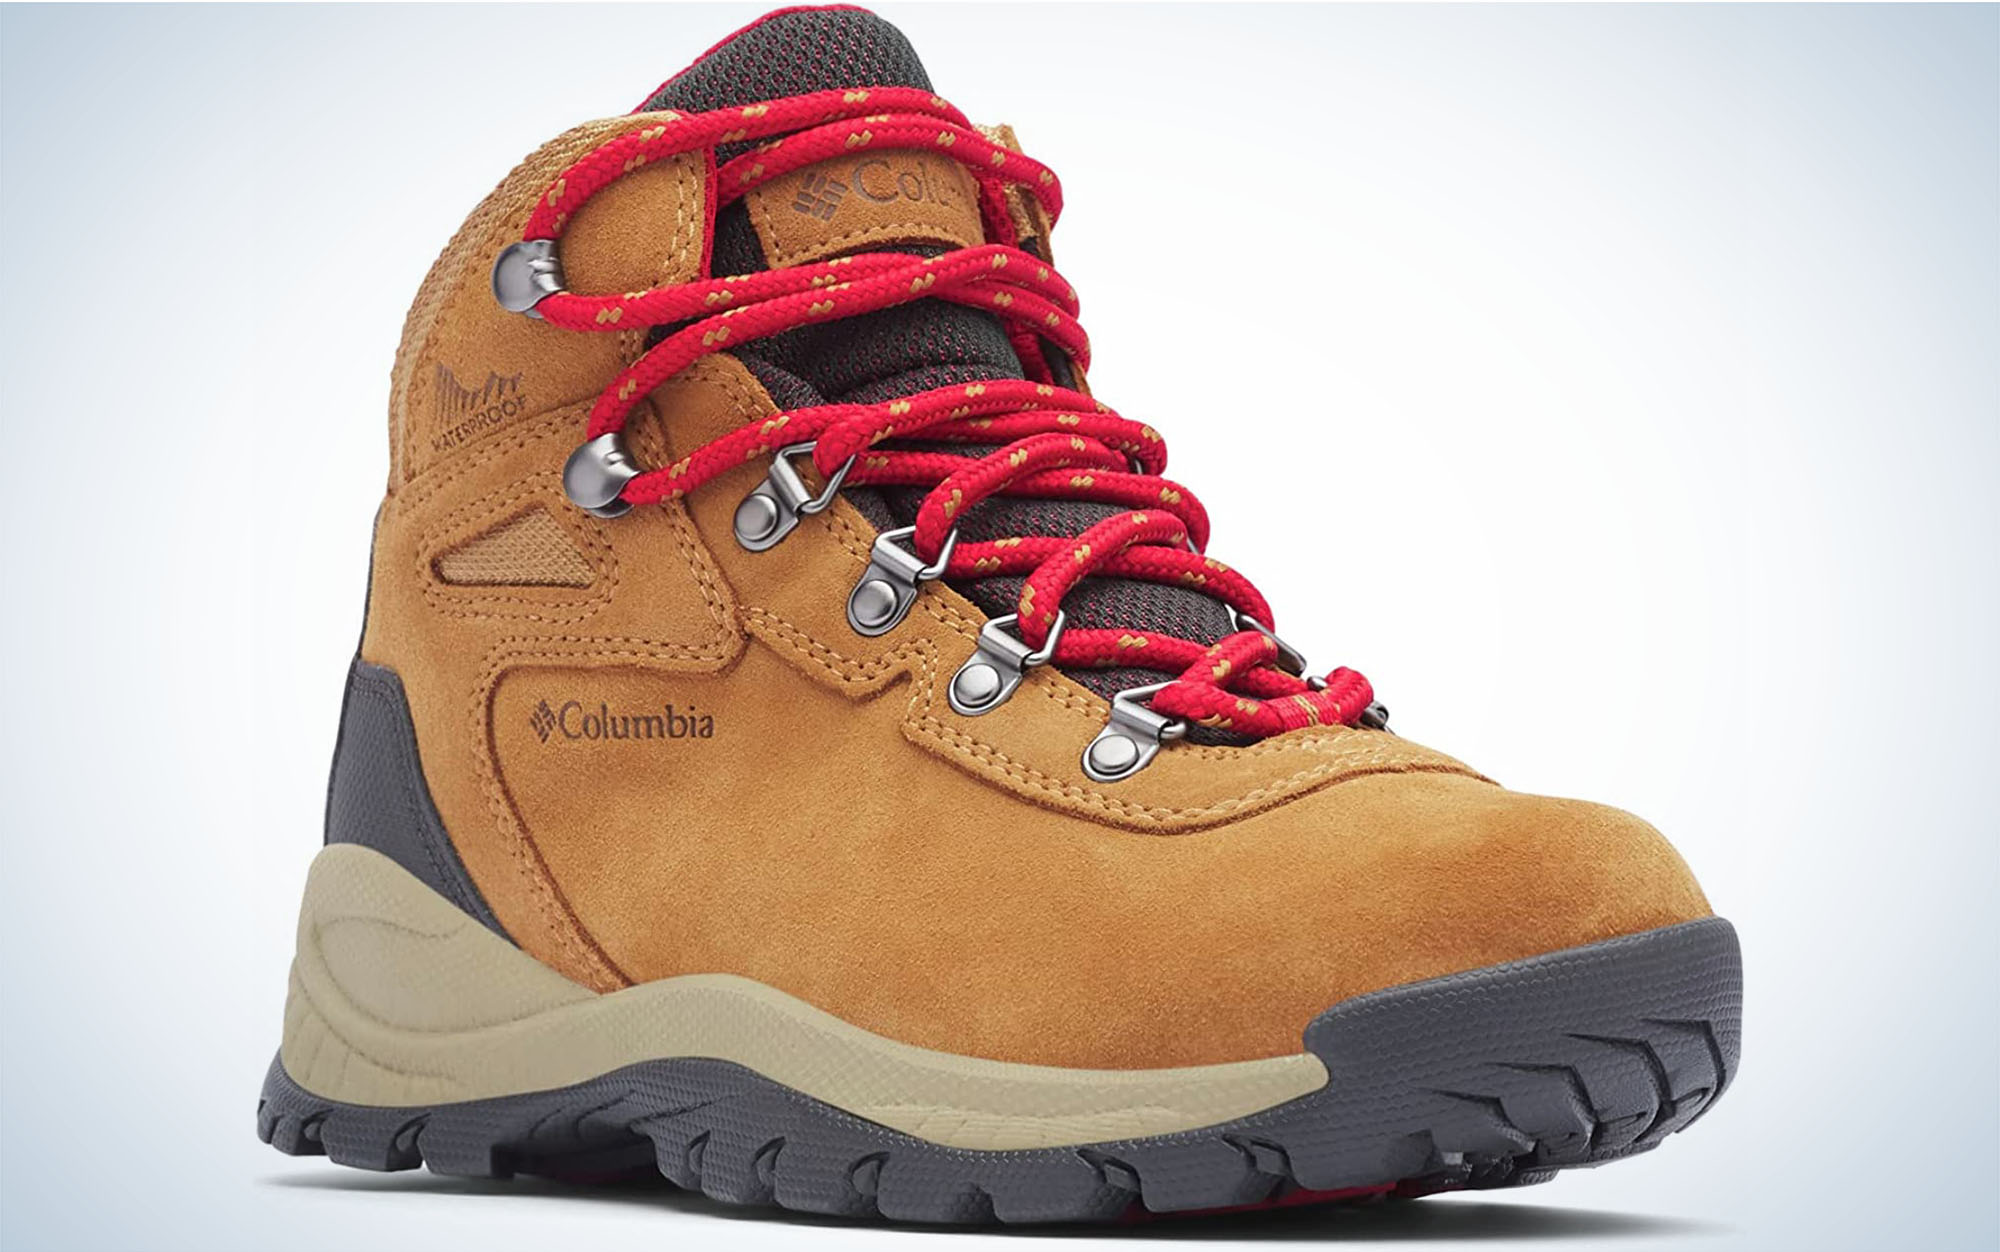 The Columbia Newton Ridge Plus Waterproof Amped is one of the best hiking shoes for beginners.